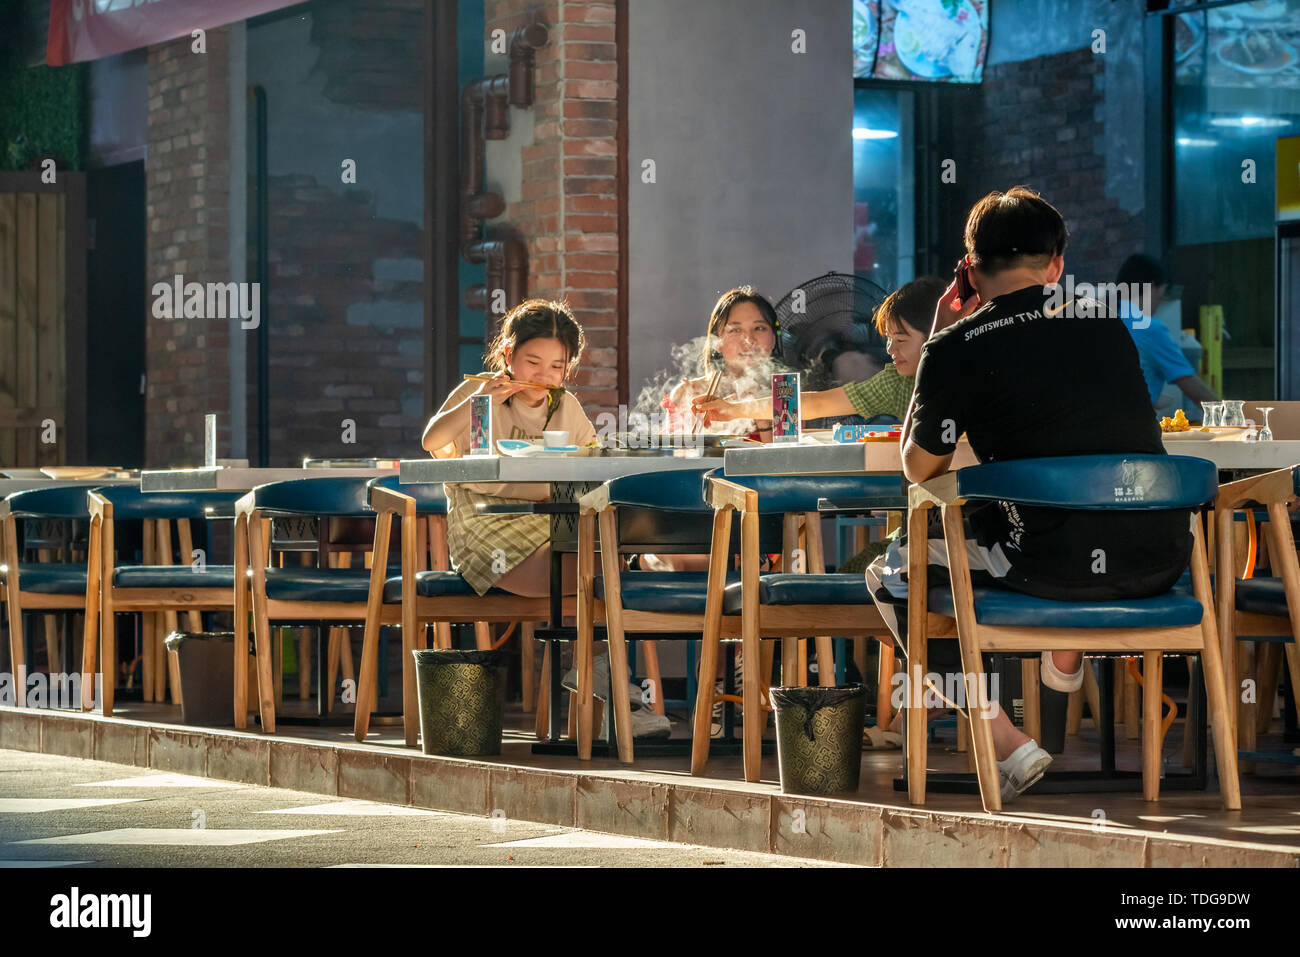 Chengdu, Sichuan province, China - June 12, 2019 : Young chinese people eating outside a restaurant in a street in late afternoon Stock Photo